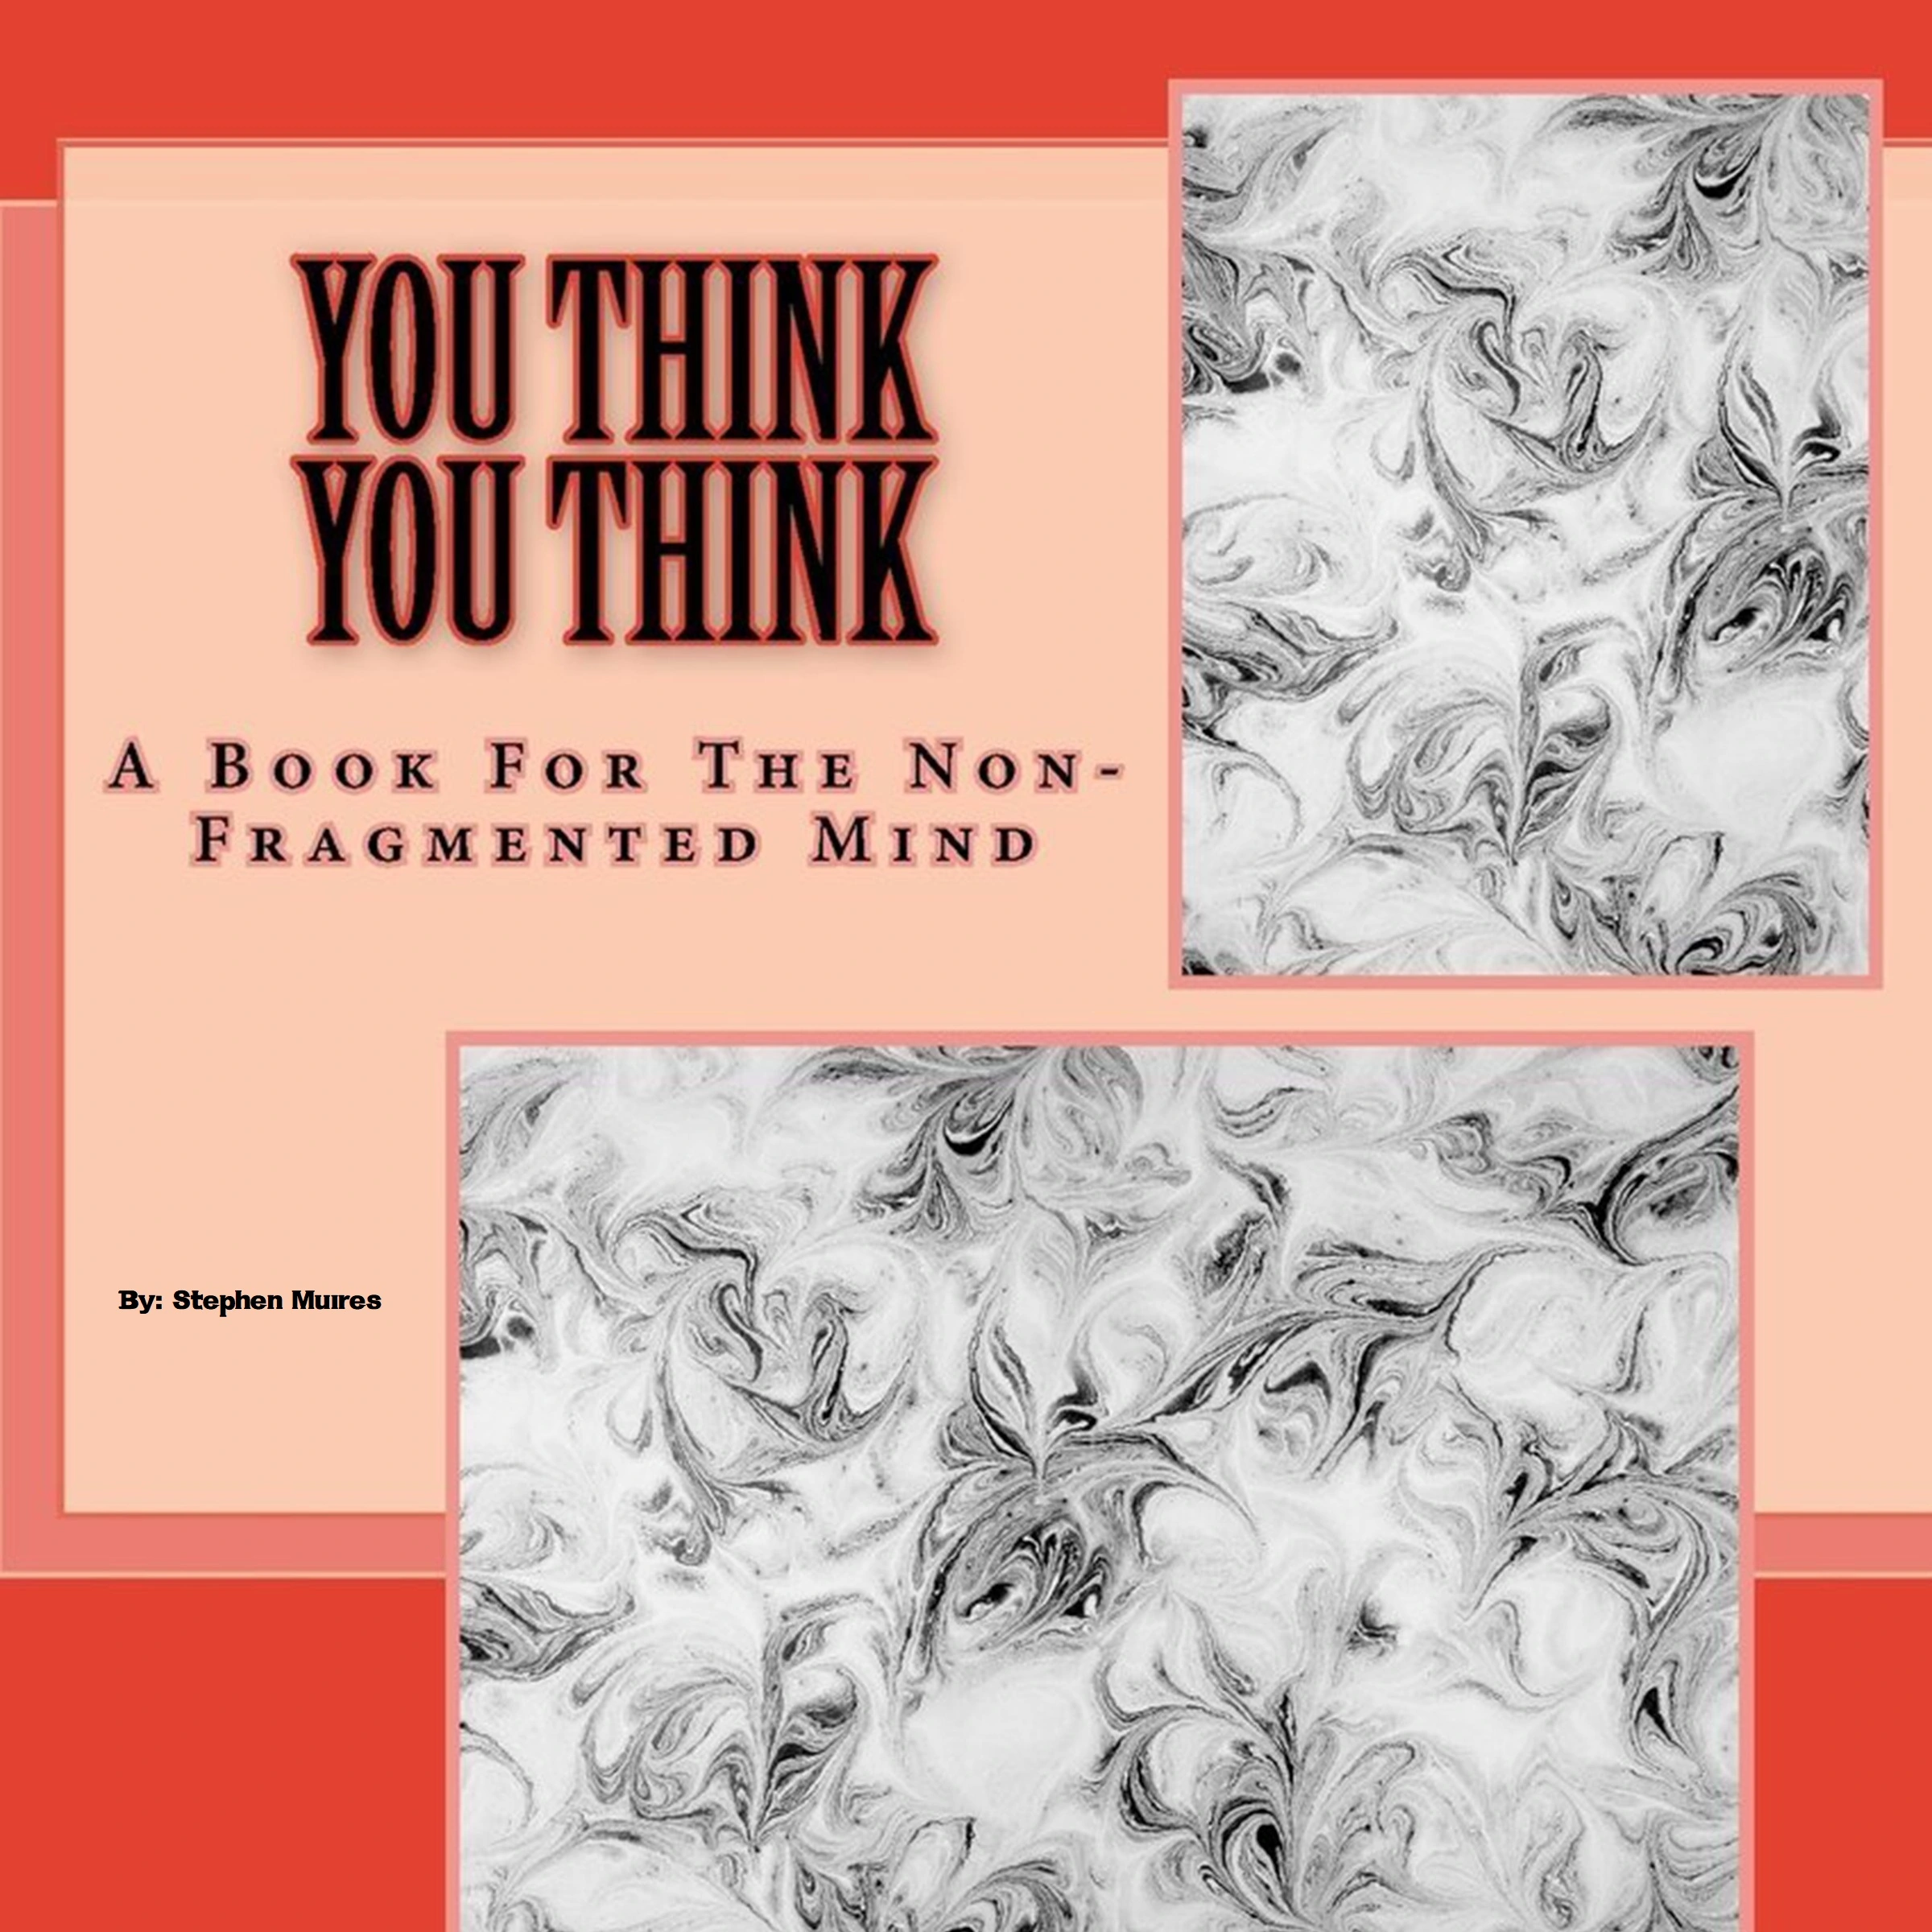 You Think You Think: A Book for the Non-Fragmented Mind Audiobook by Stephen Muires